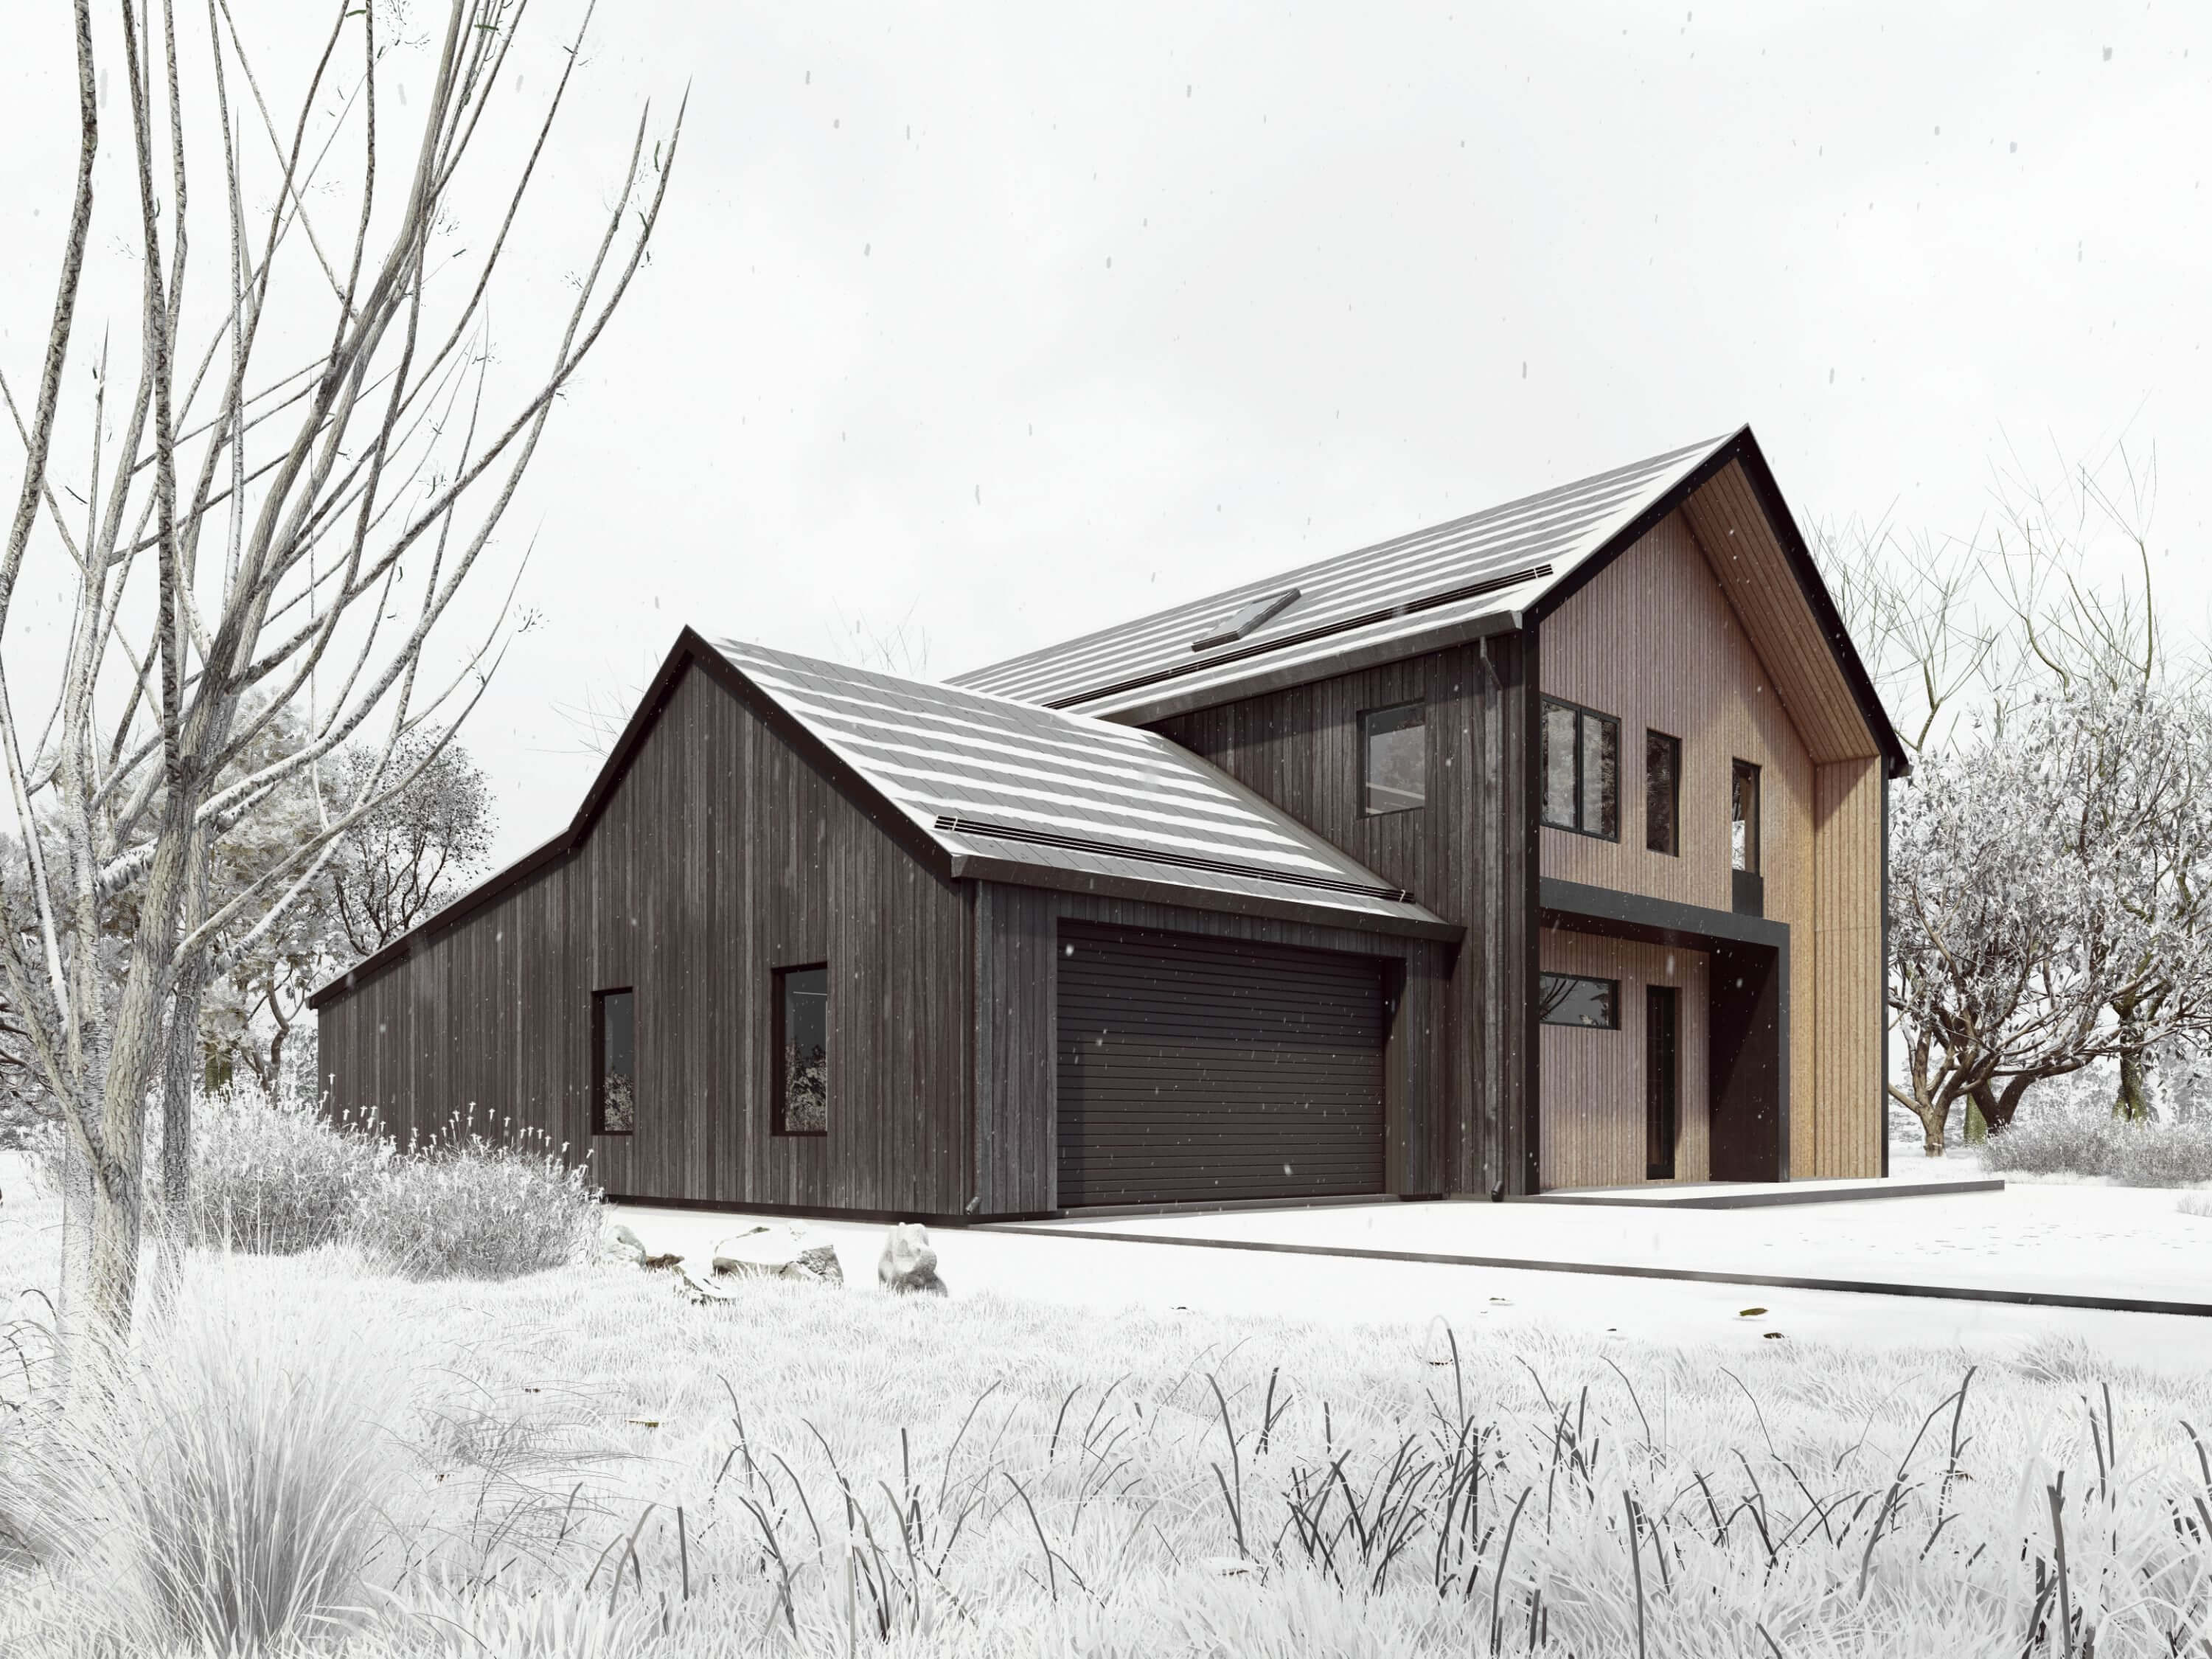 5 Bedroom Black Nordic Style Barndo with Attached Garage